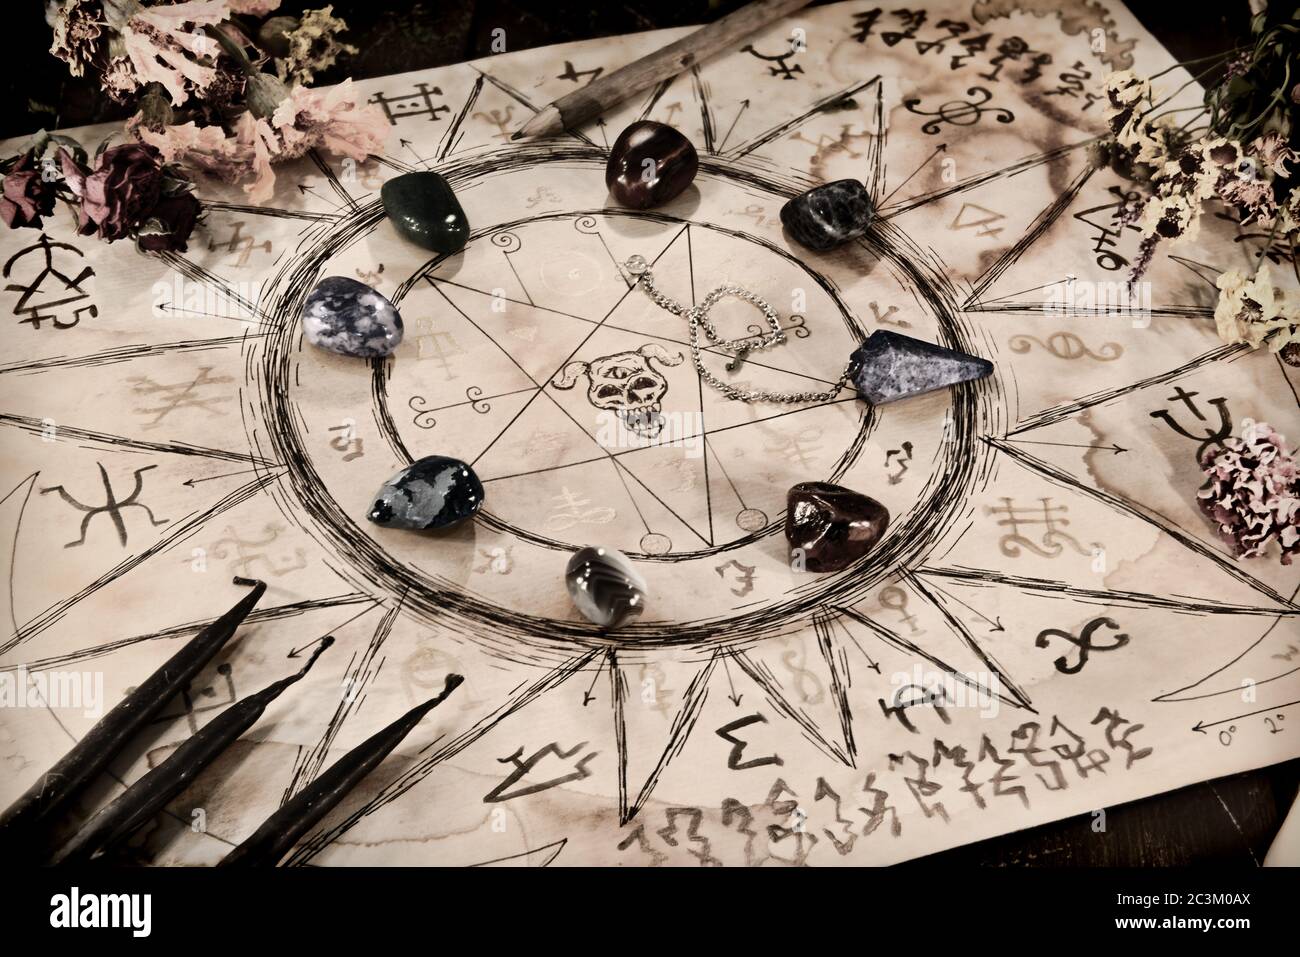 Drawing with magic spells, minerals and black candles on witch table. Wicca, esoteric and occult background with vintage magic objects for mystic ritu Stock Photo